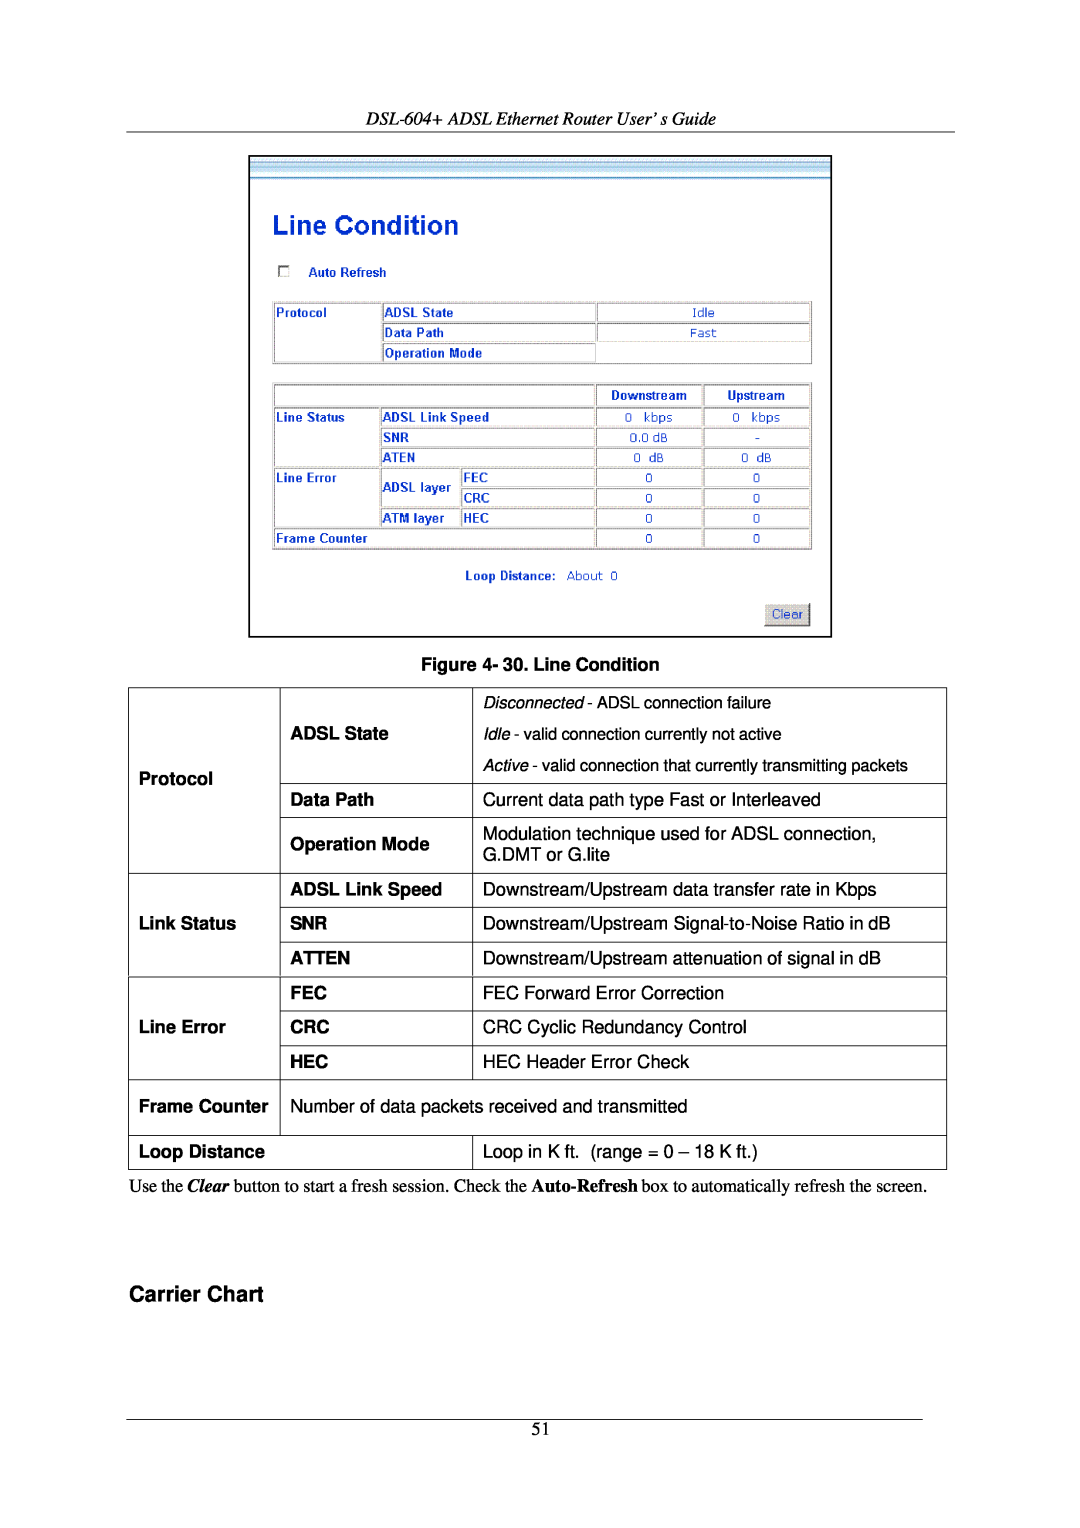 D-Link manual Carrier Chart, DSL-604+ ADSL Ethernet Router User’s Guide, Disconnected - ADSL connection failure 